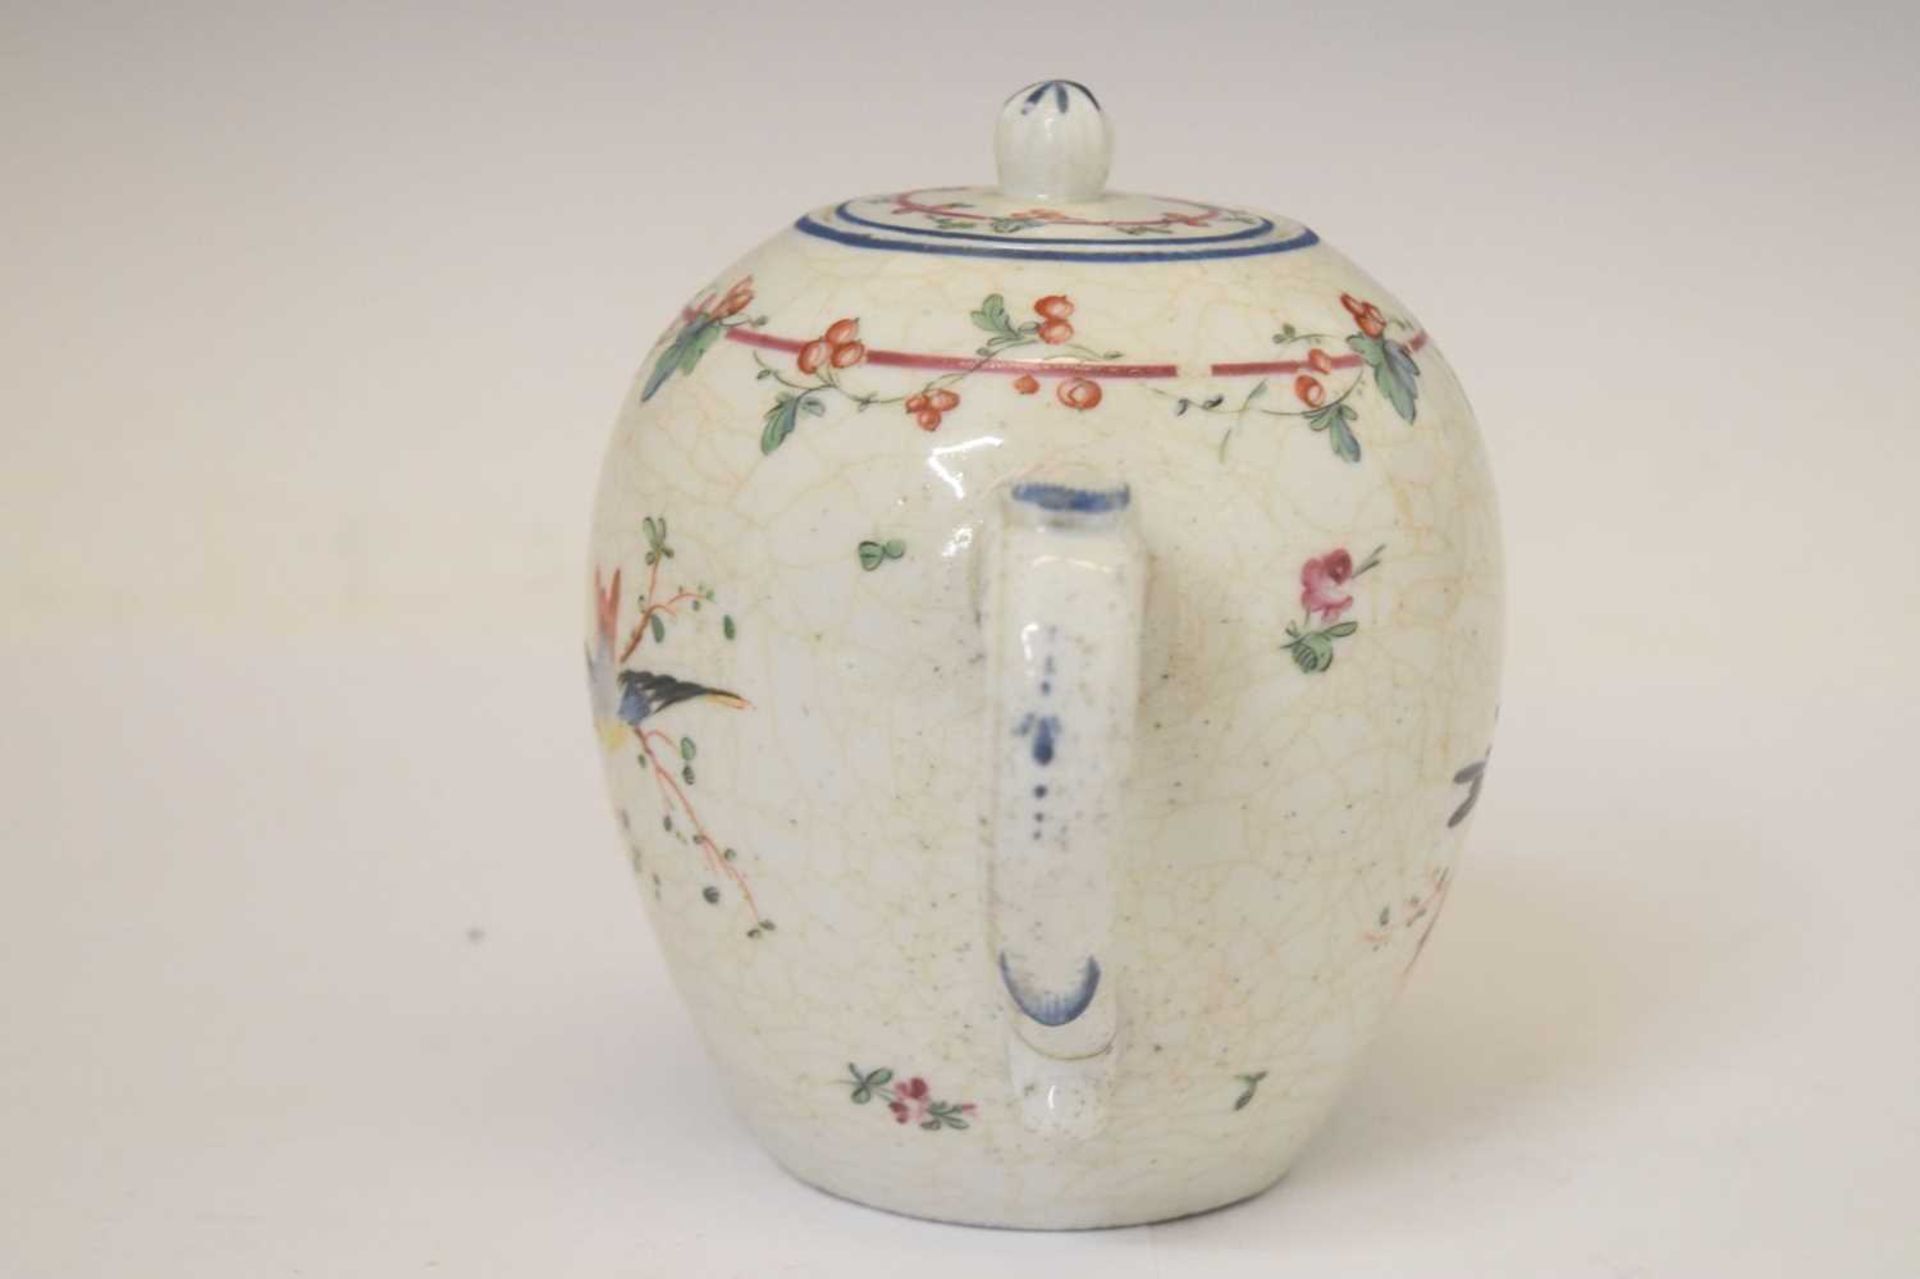 18th century Bristol (Champions) porcelain teapot and cover - Image 3 of 18